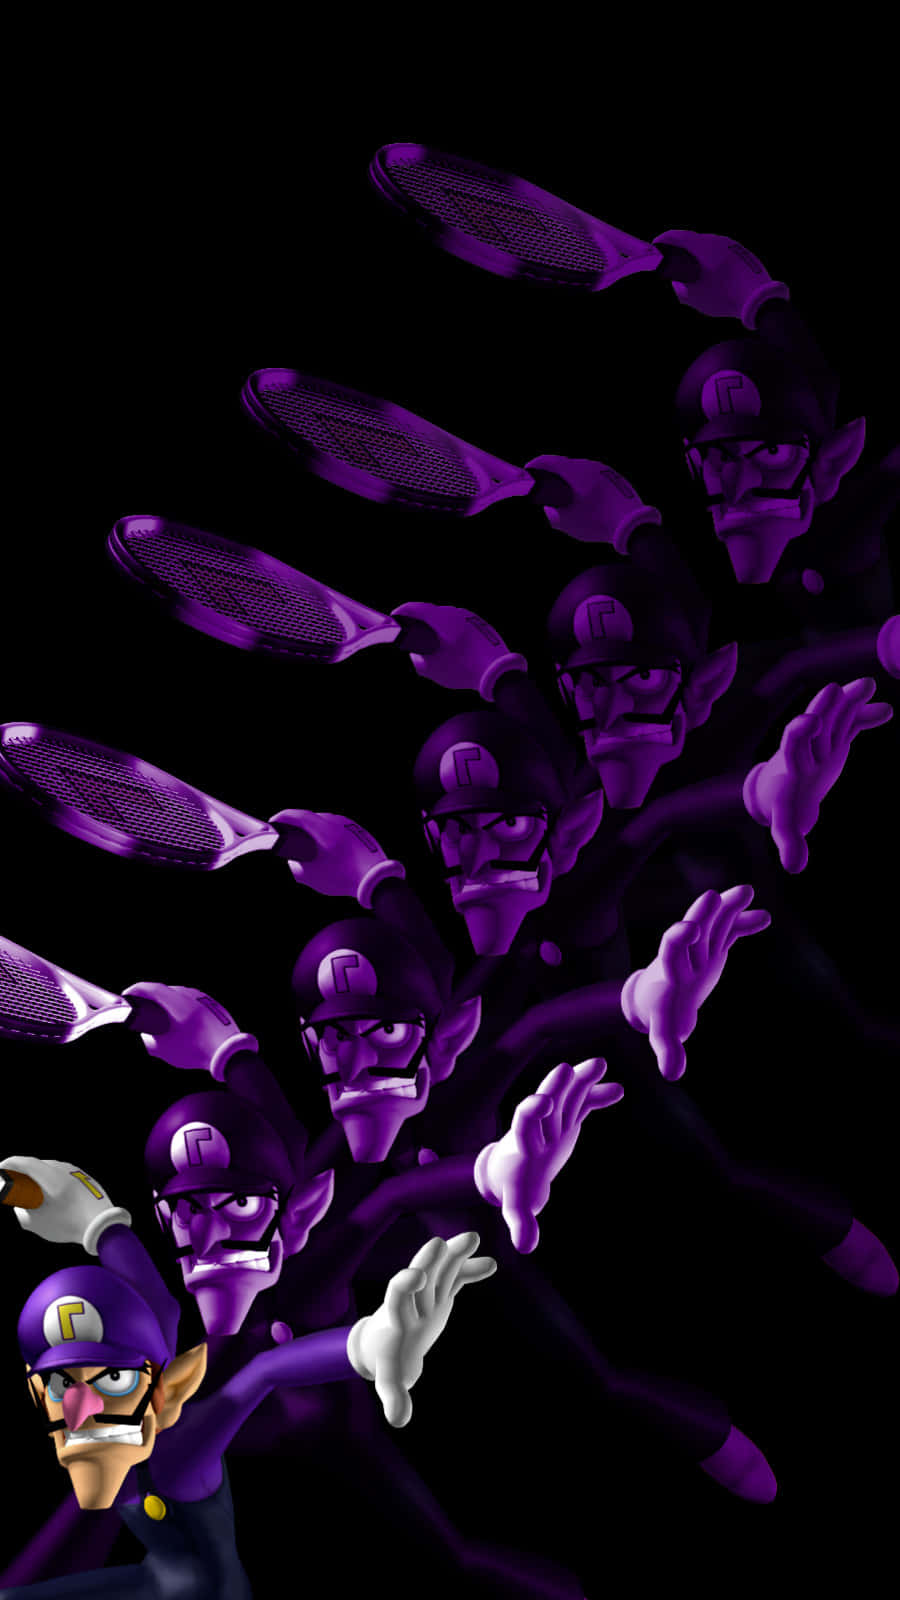 Waluigi strikes a pose in his iconic purple and black outfit. Wallpaper